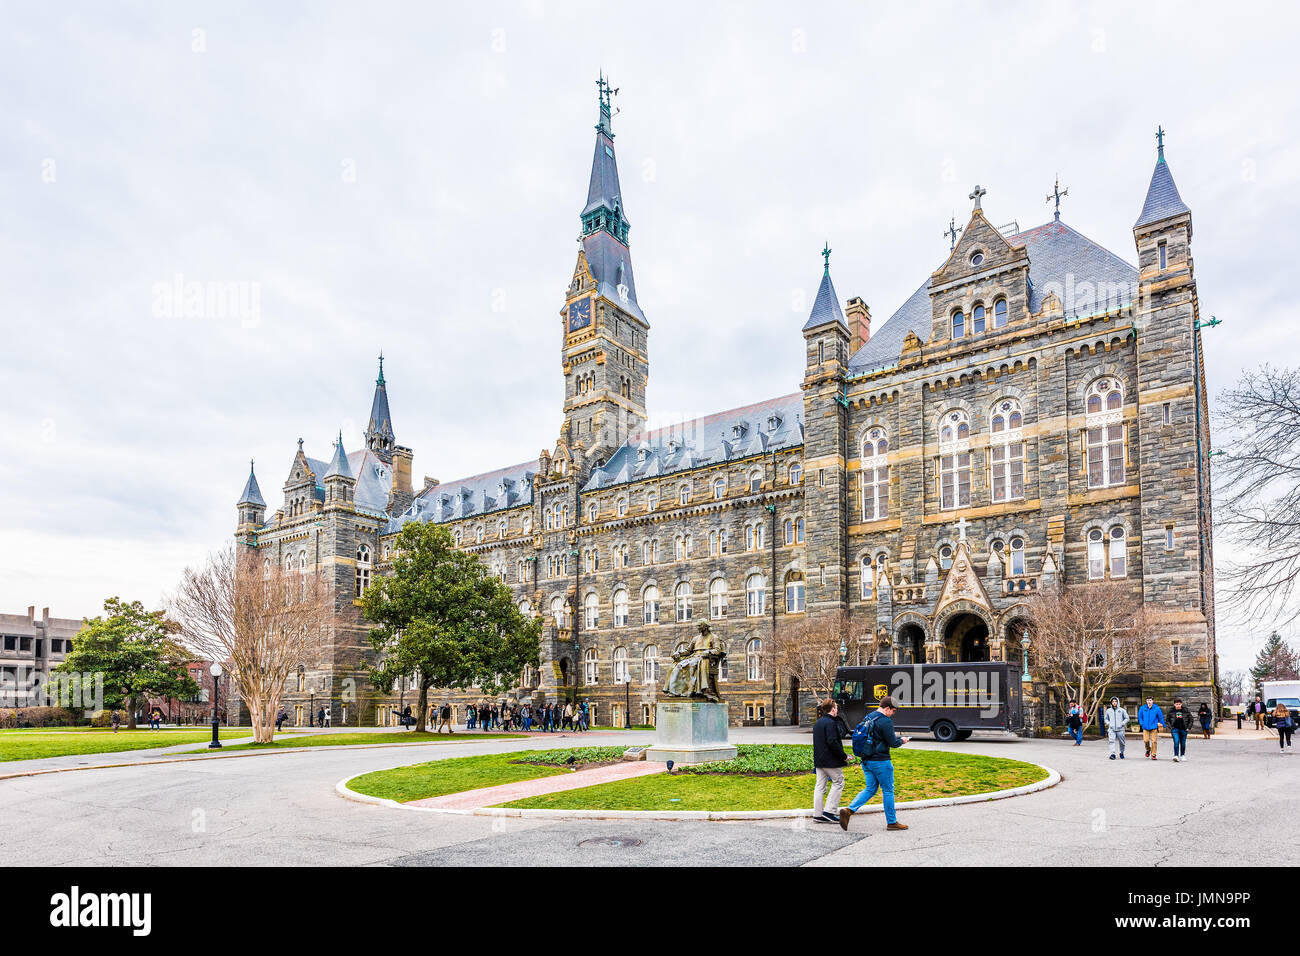 Washington DC, USA - March 20, 2017: Georgetown University on campus with Healy Hall and people walking out of main building Stock Photo